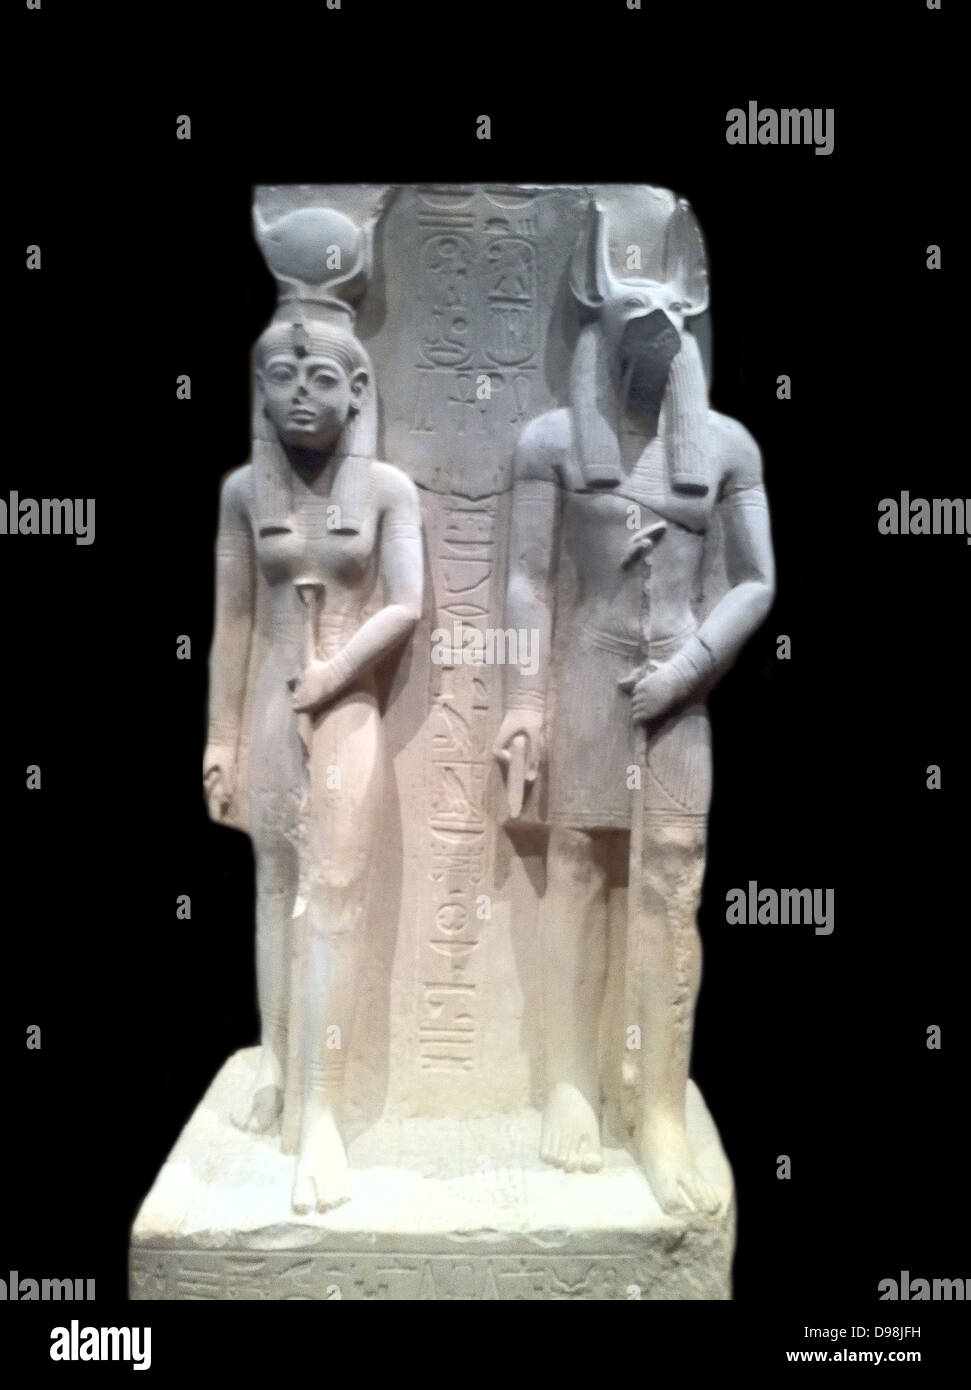 Limestone statue representing Isis and epwawet. 19th Dynasty, reign of Ramses II circa 1279-1213 BC. Isis was the patron goddess of the Royal scribe Siaset, who commissioned this statue. Wepwawet was the god of the Town of Assiut where it was made. Stock Photo